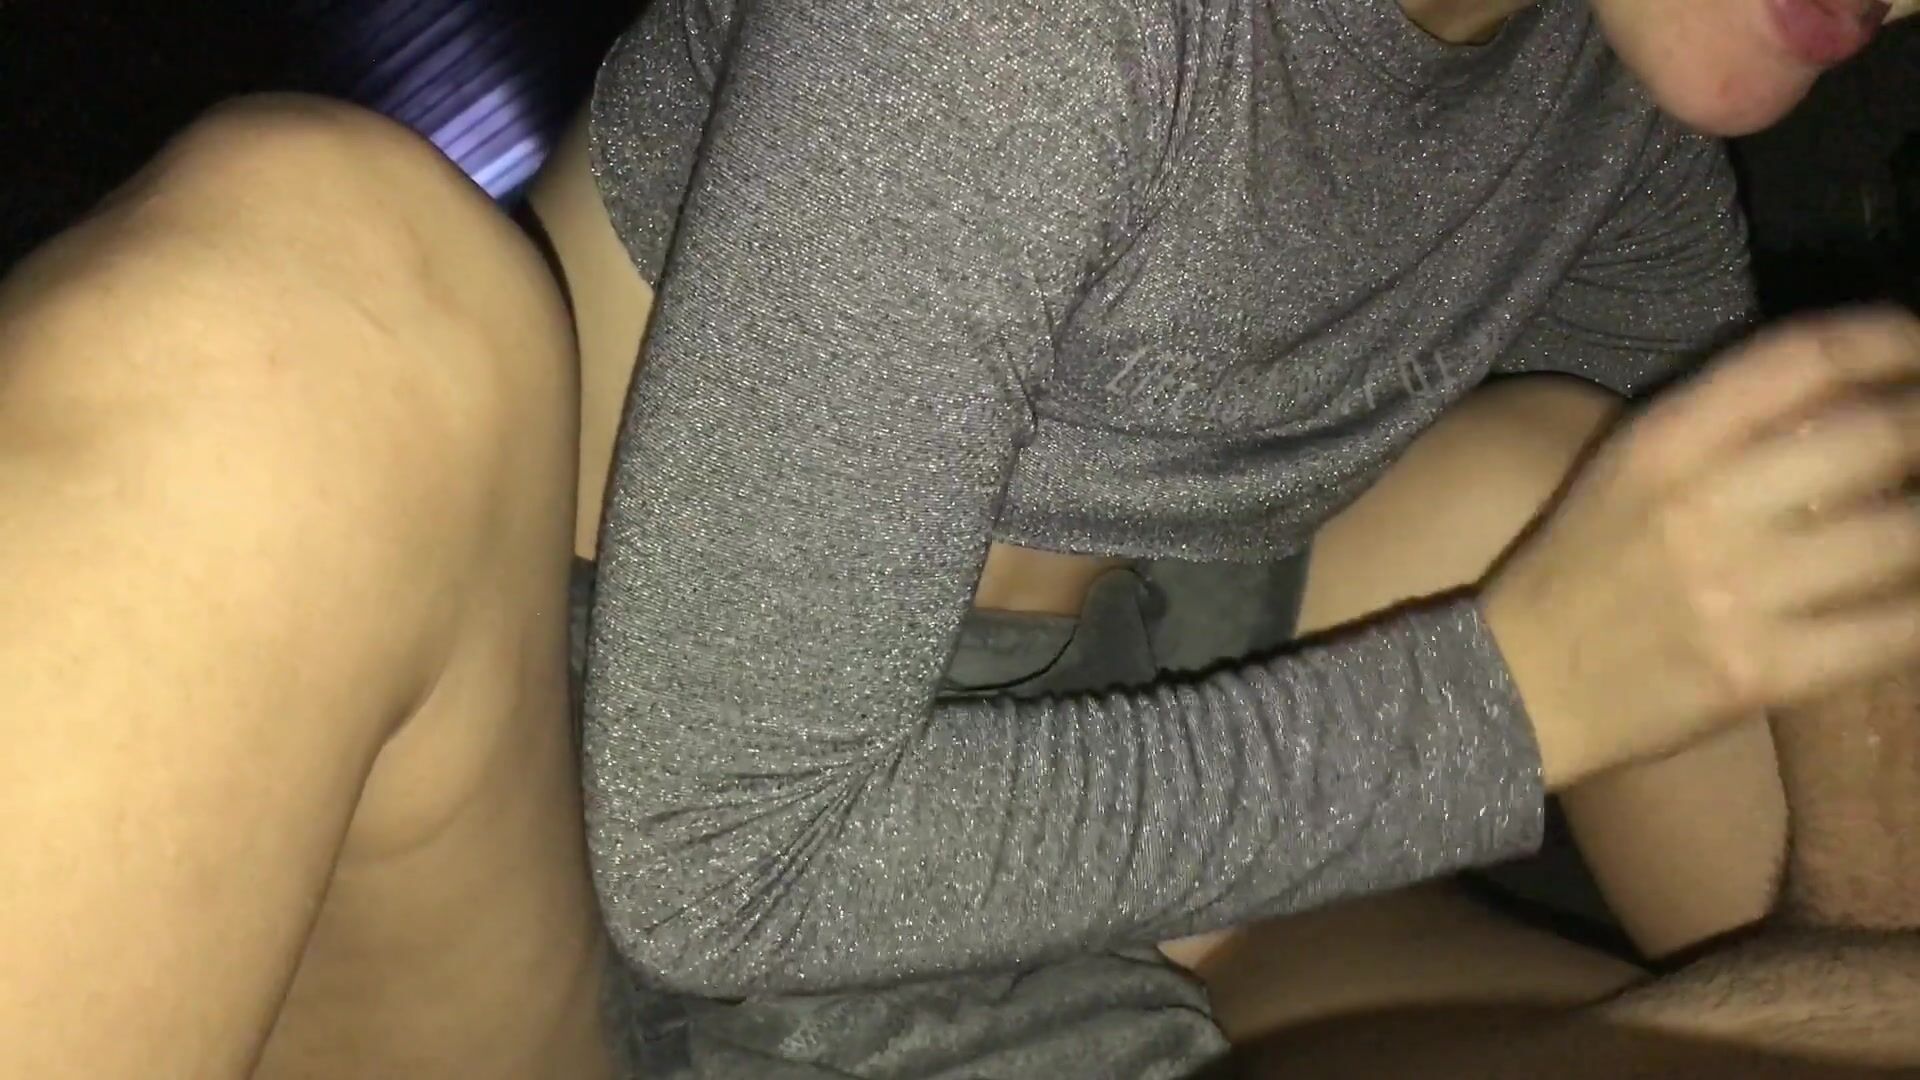 Real night sex with a teen student in the dorm pic image